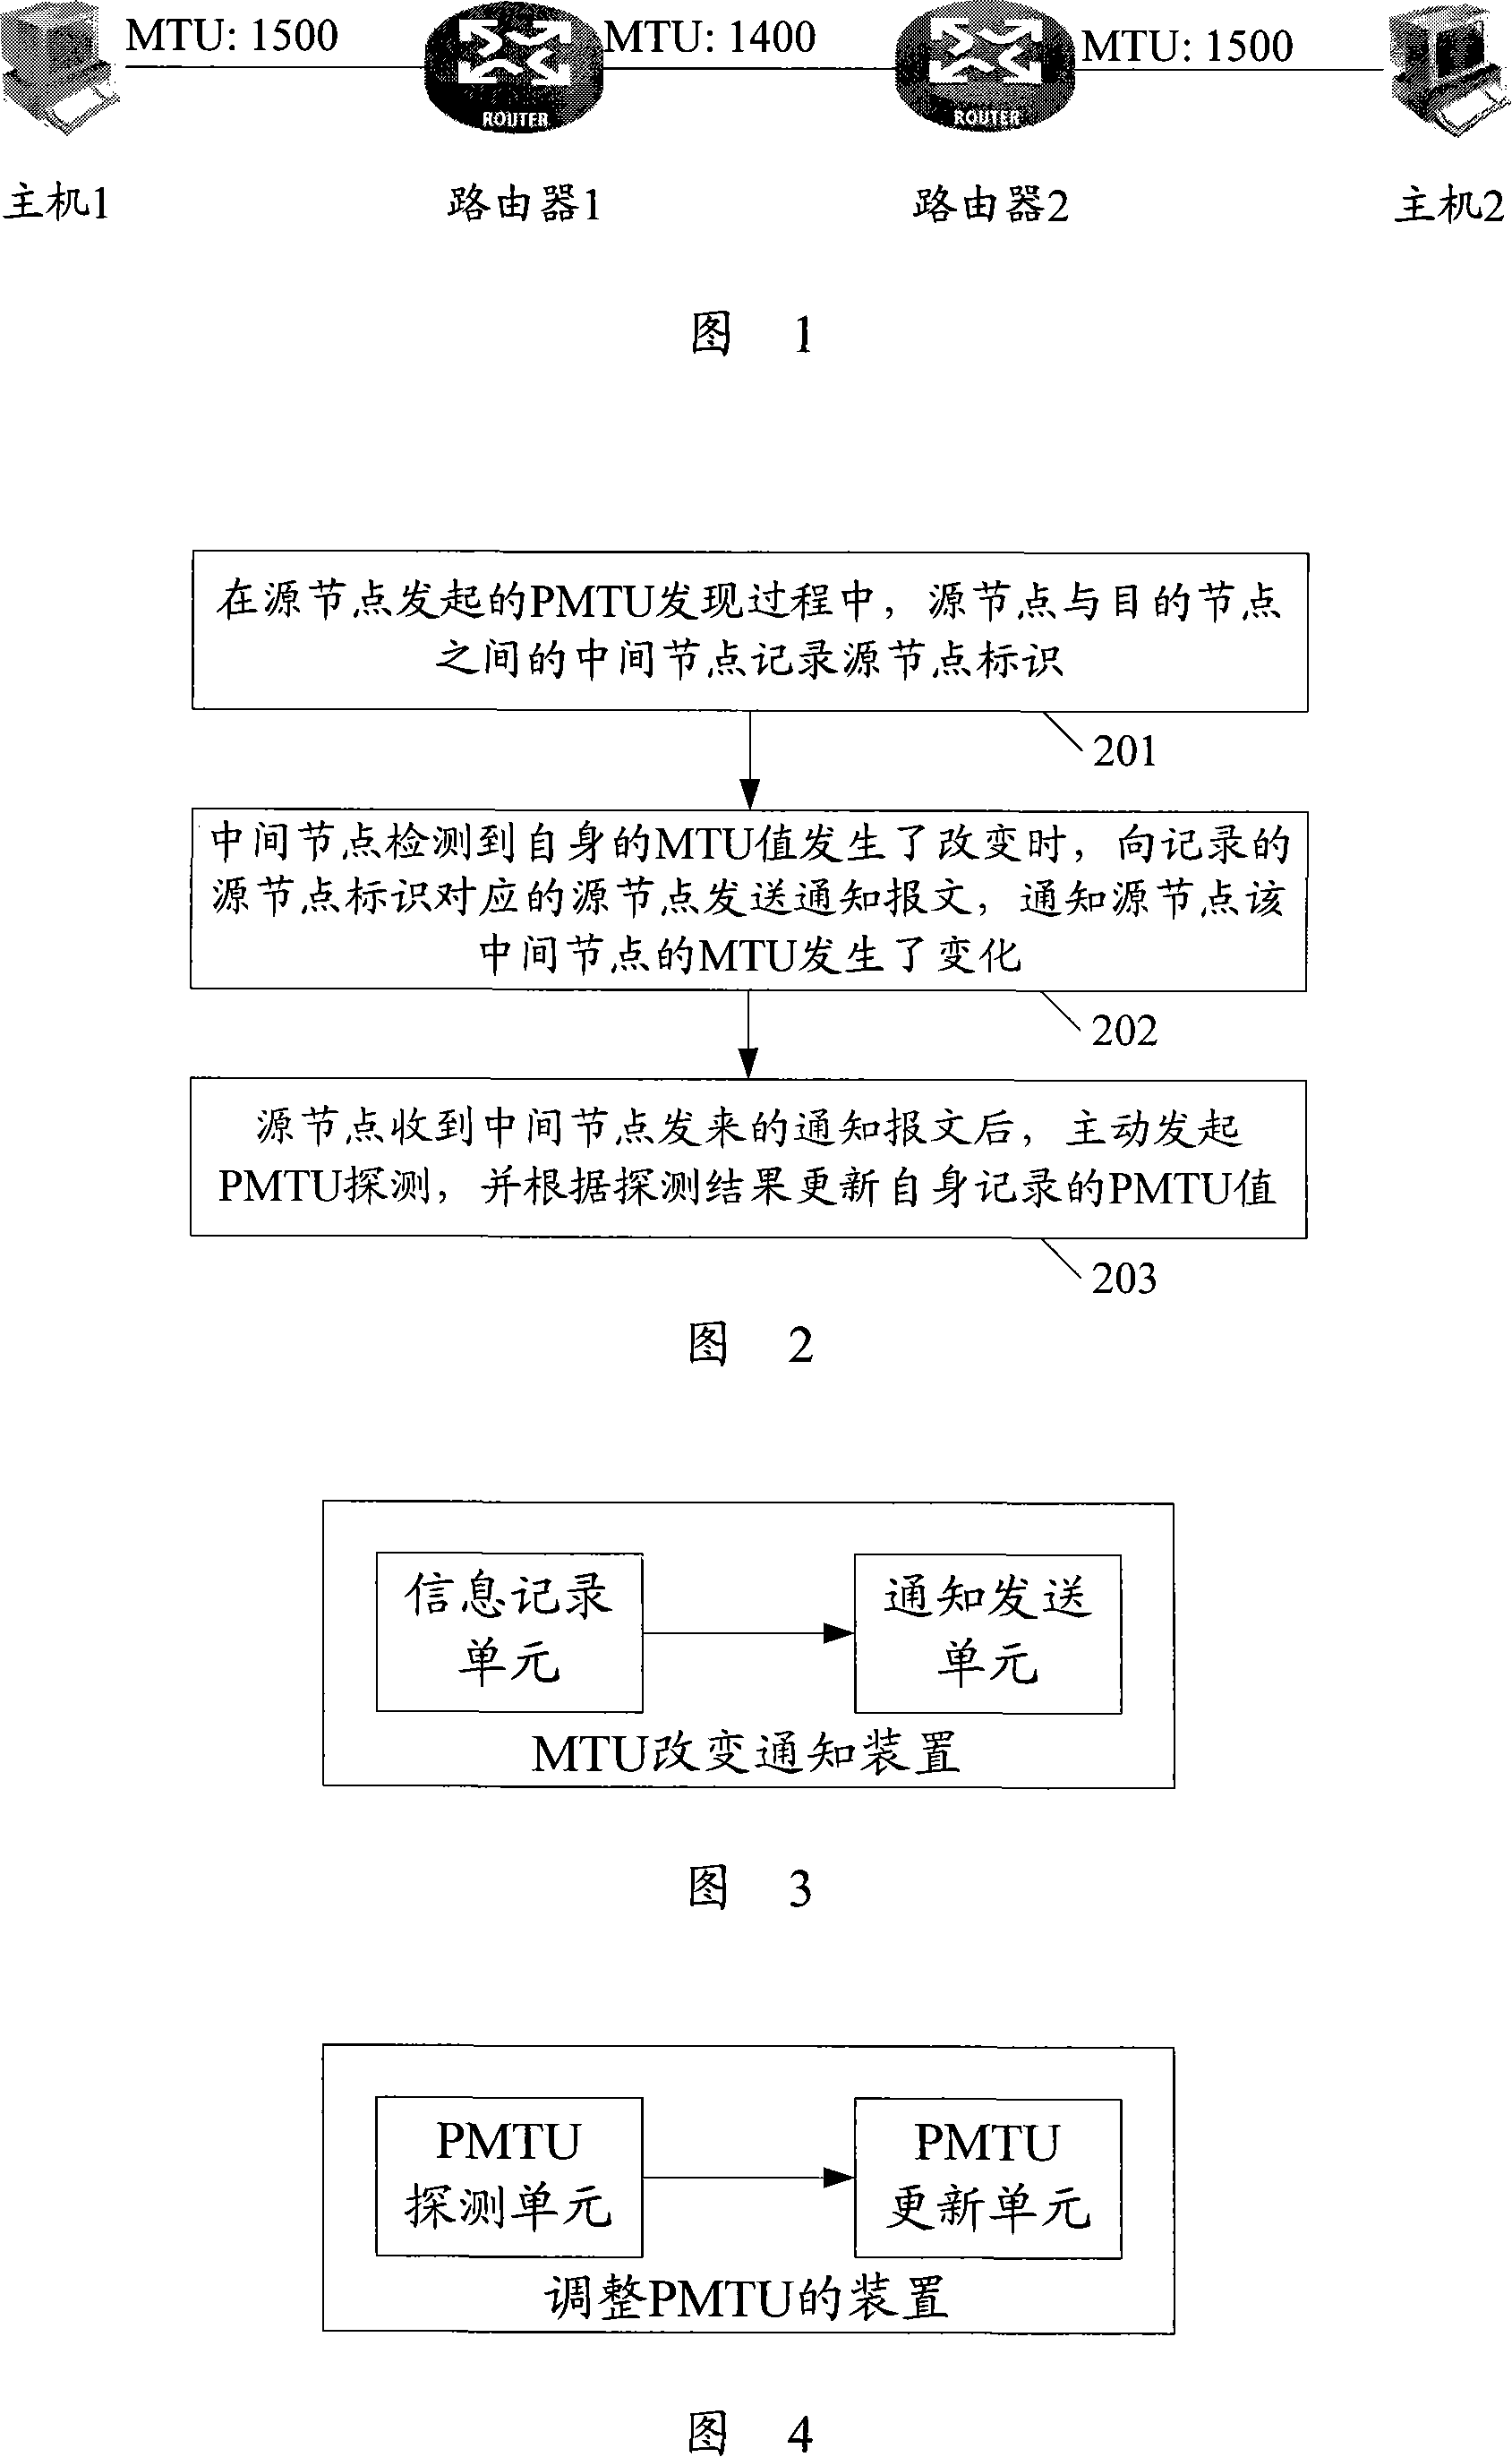 Method and device for adjusting path maximum transfer unit